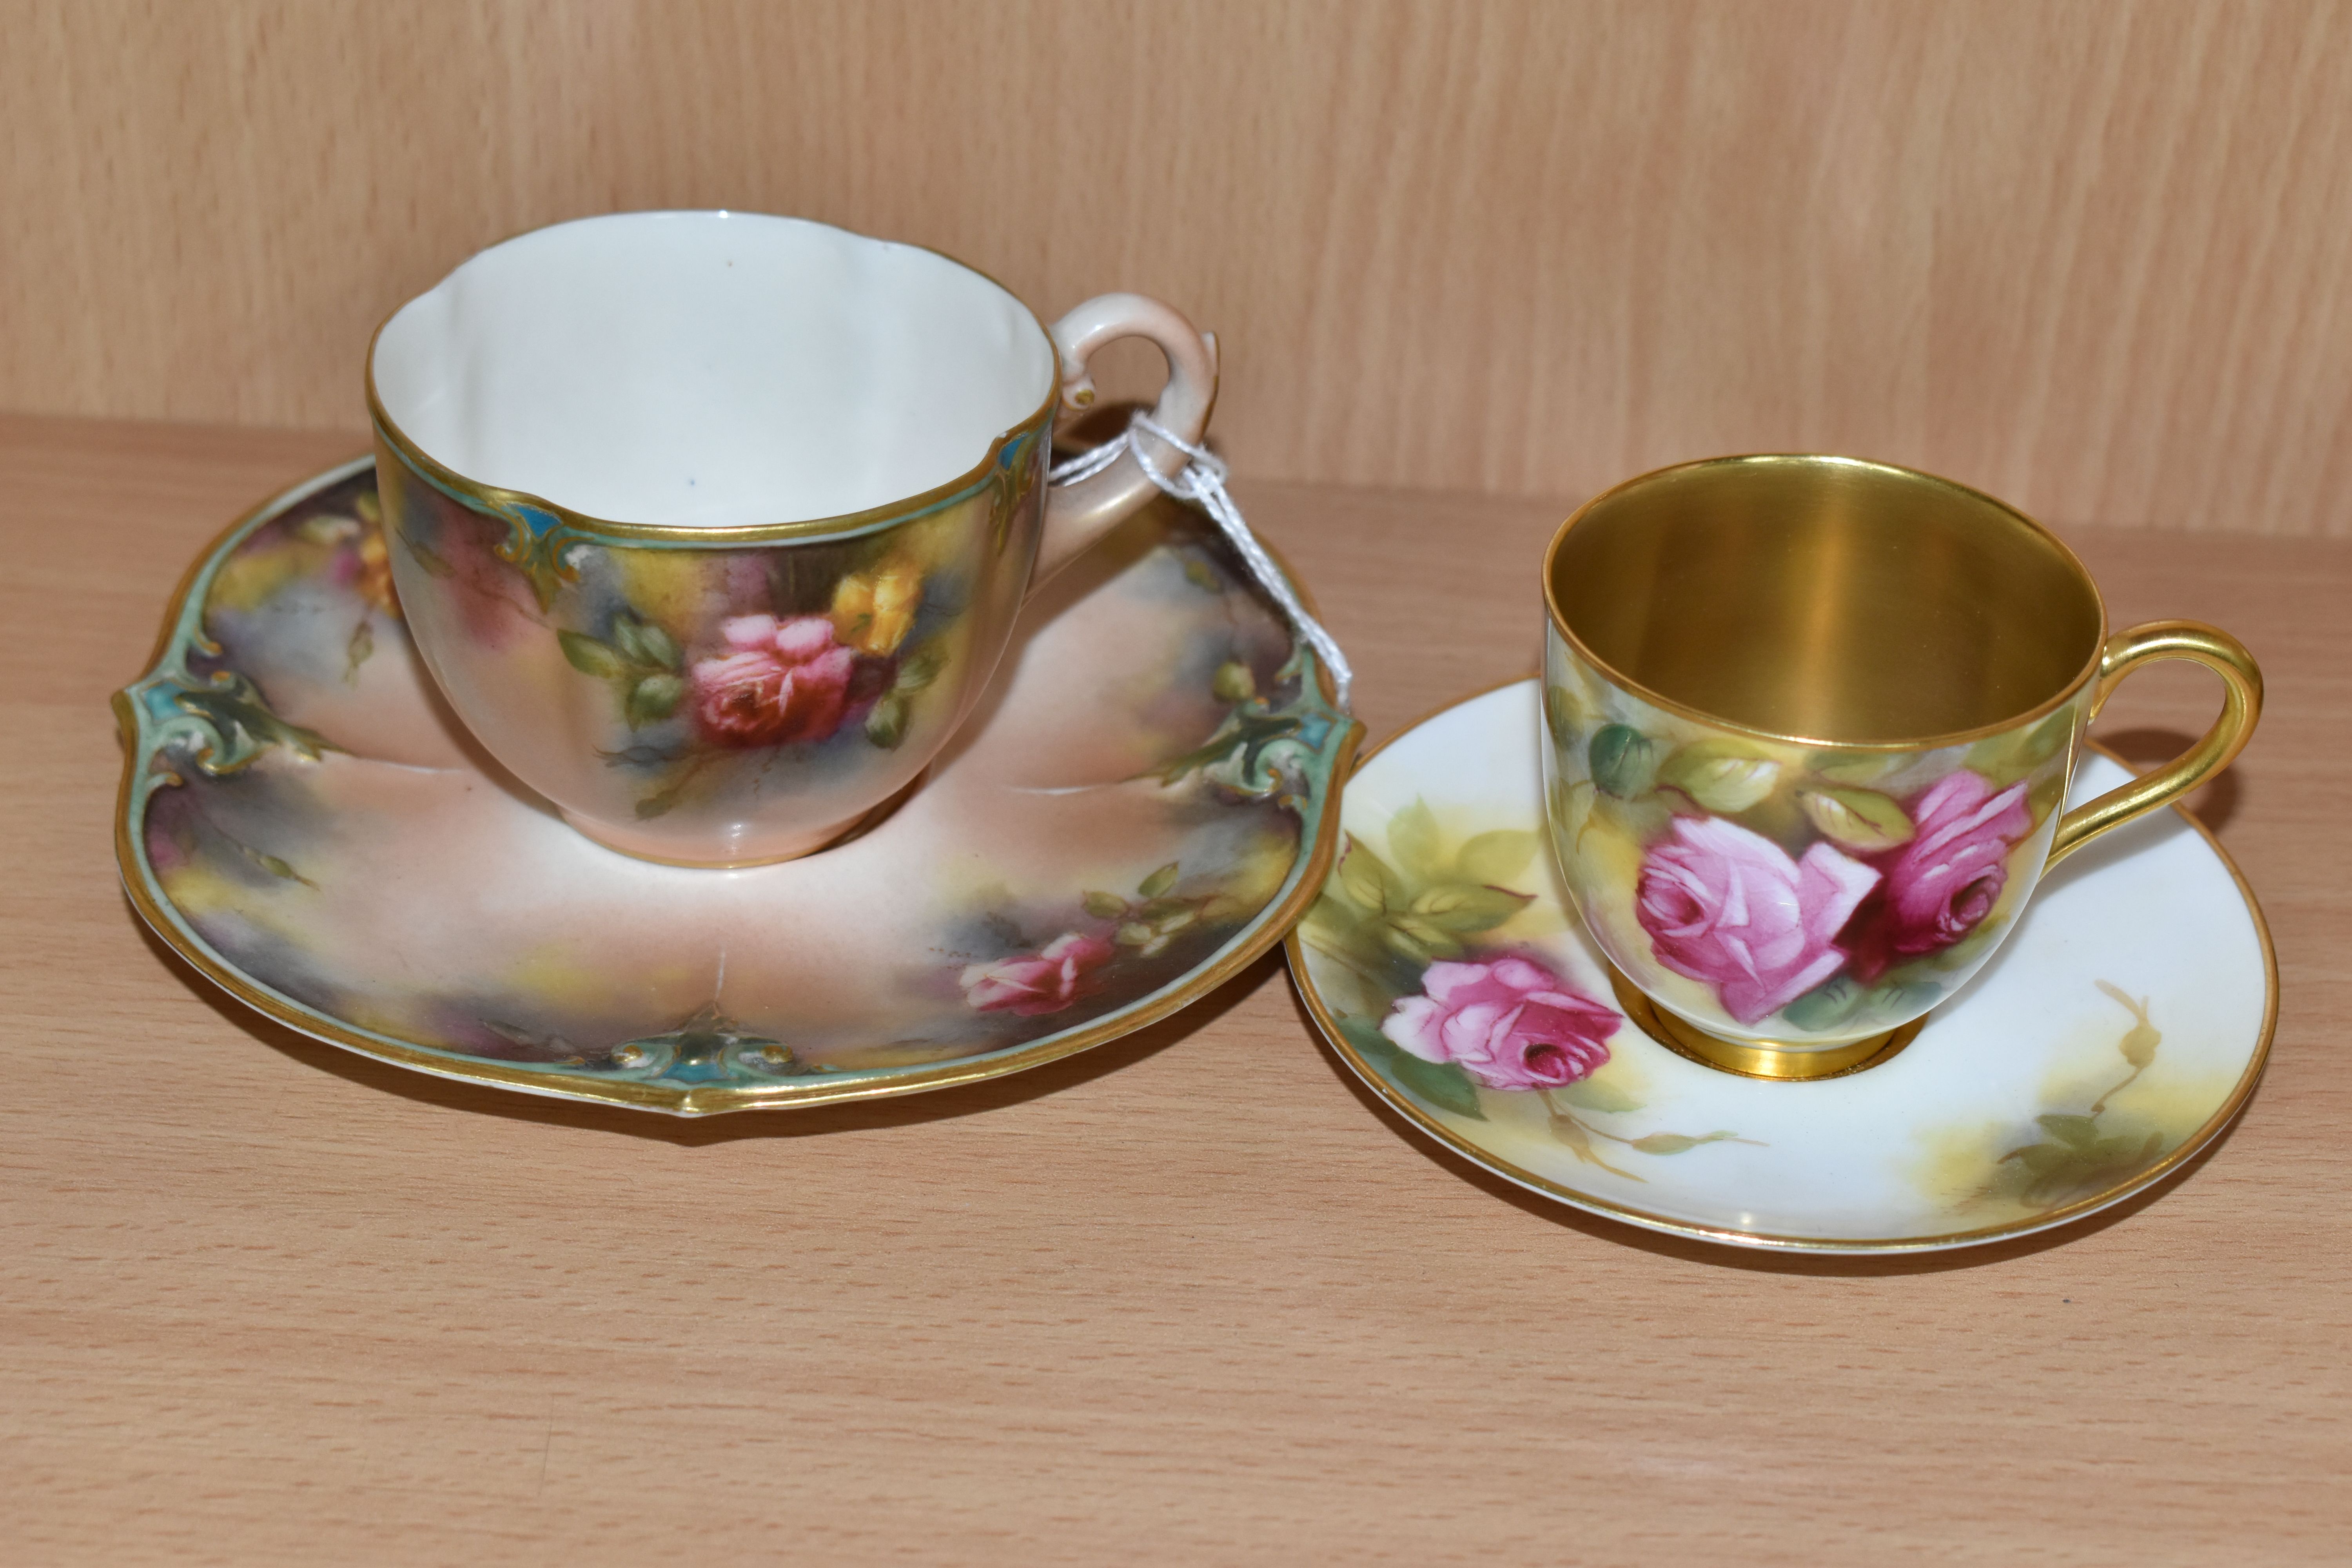 A ROYAL WORCESTER CABINET CUP AND SAUCER, WITH A JAMES HADLEY & SONS TEACUP AND SAUCER, comprising a